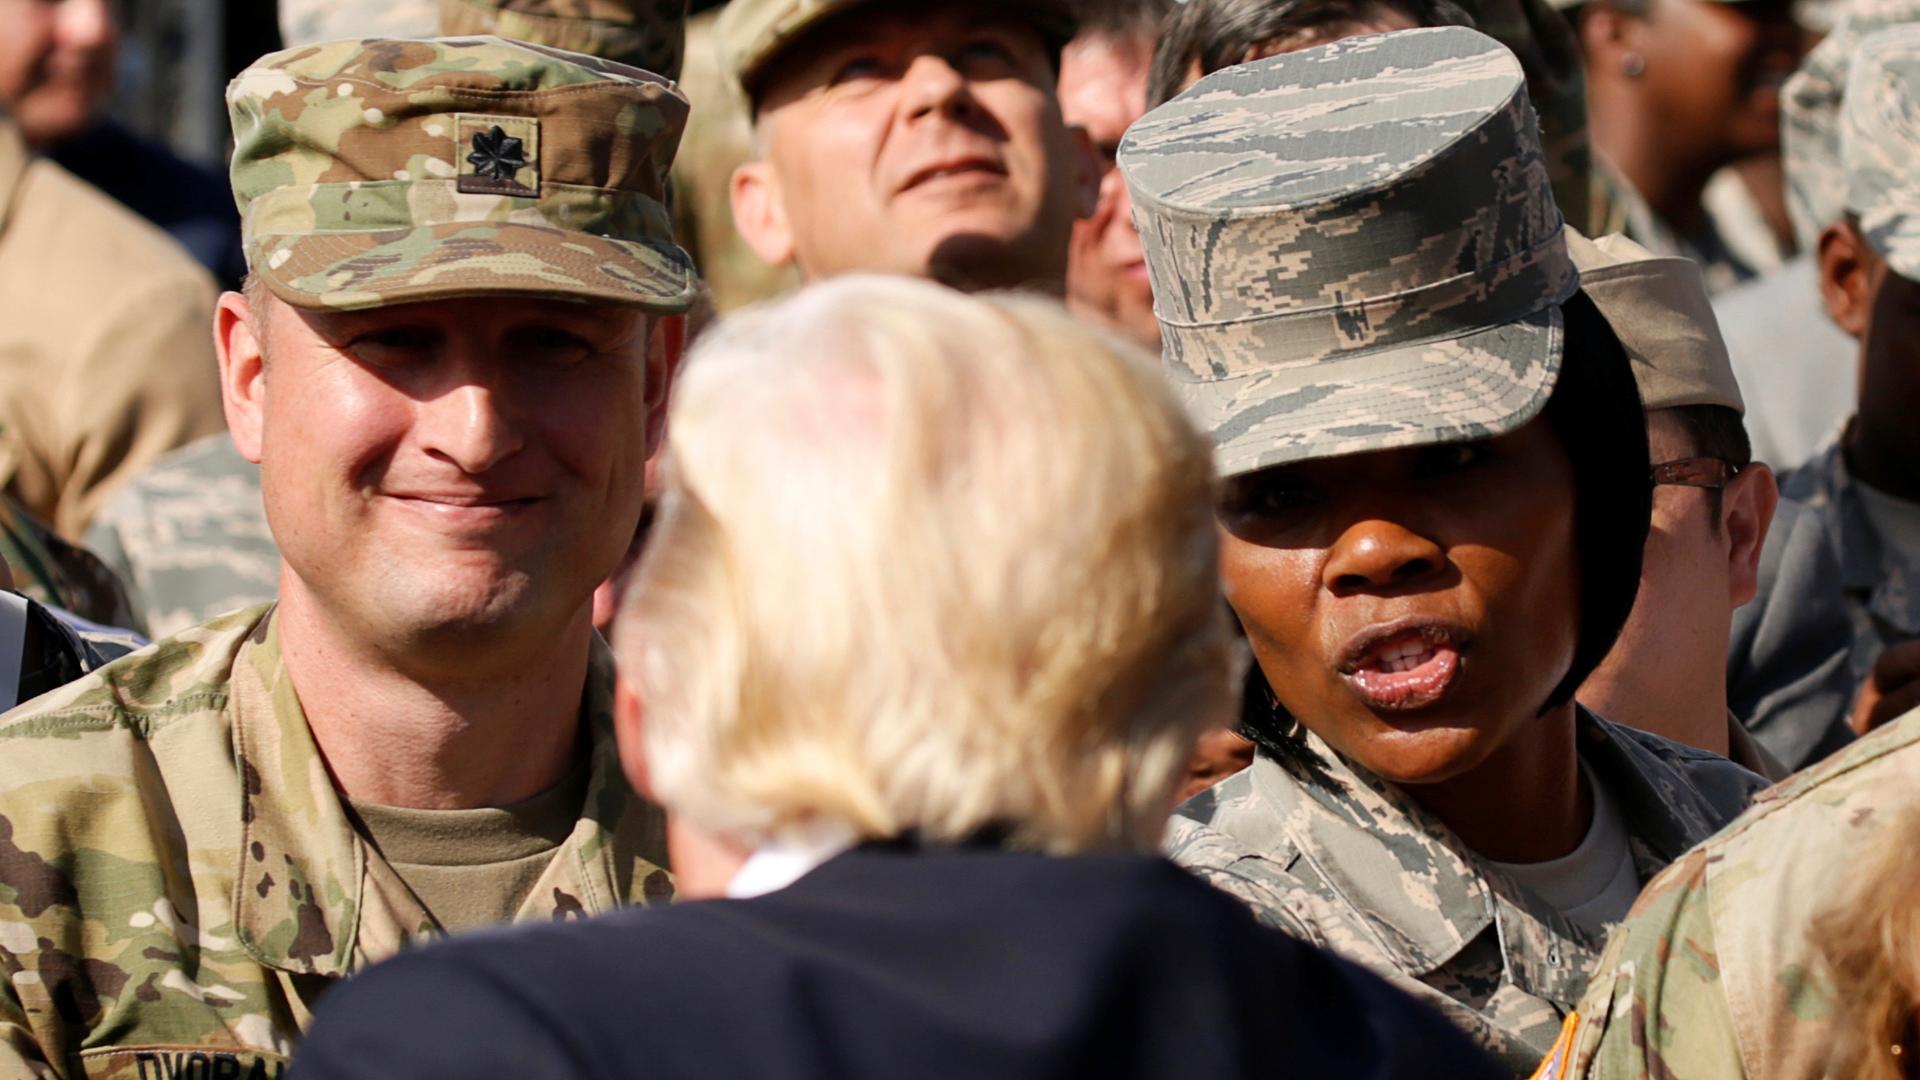 U.S. President Donald Trump greets military personnel while attending the 9/11 observance at the National 9/11 Pentagon Memorial in Arlington, Virginia on September 11, 2017.